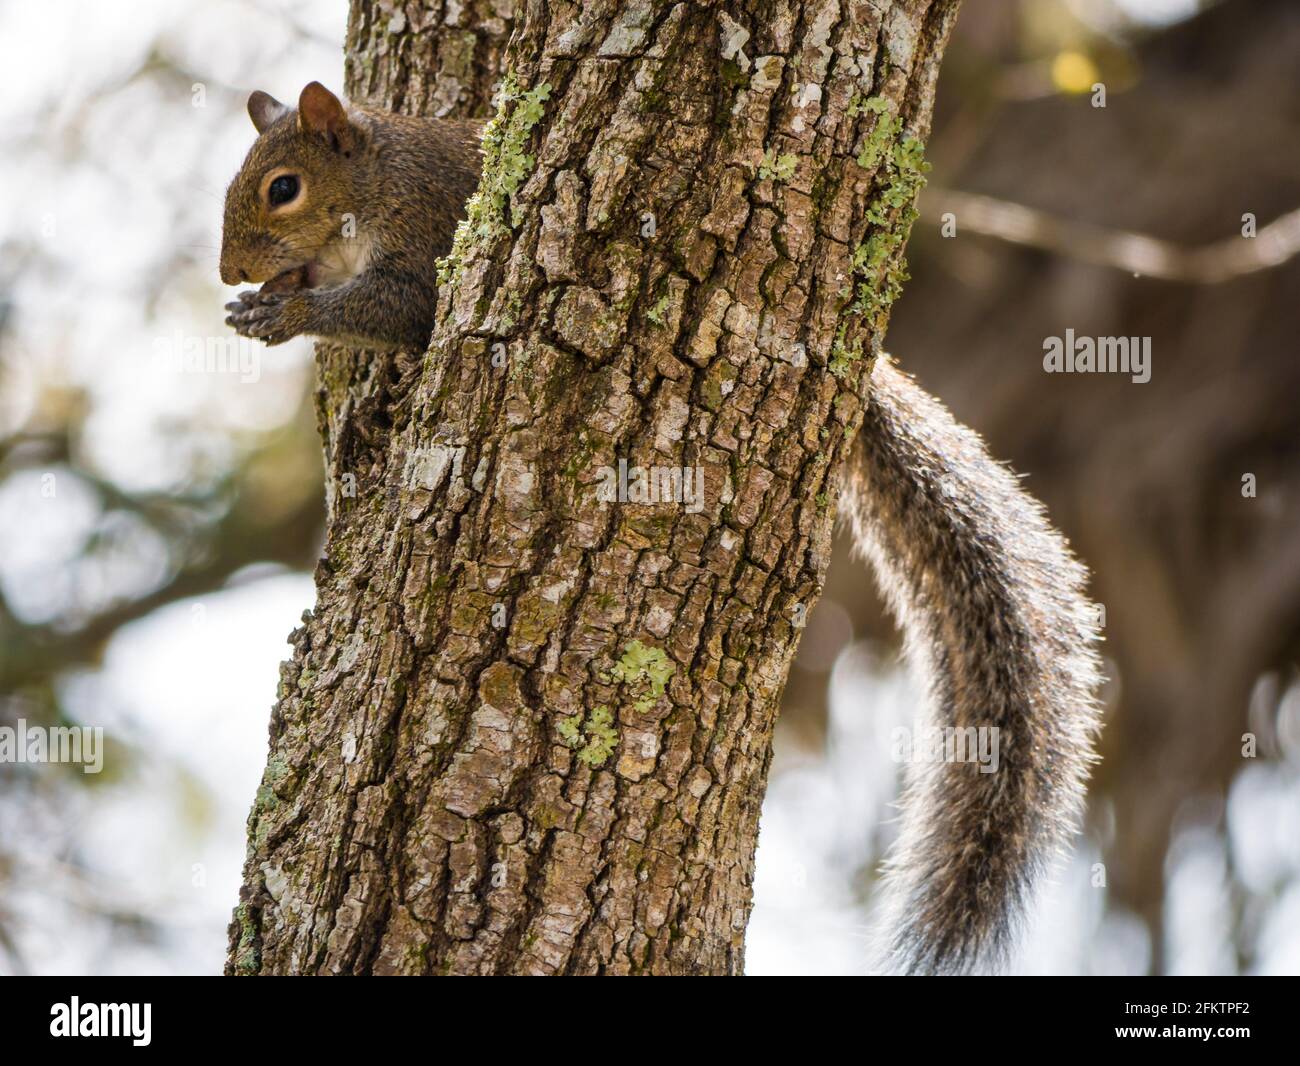 Squirrel (Squirrels are members of the family Sciuridae, a family that includes small or medium-size rodents.) Stock Photo